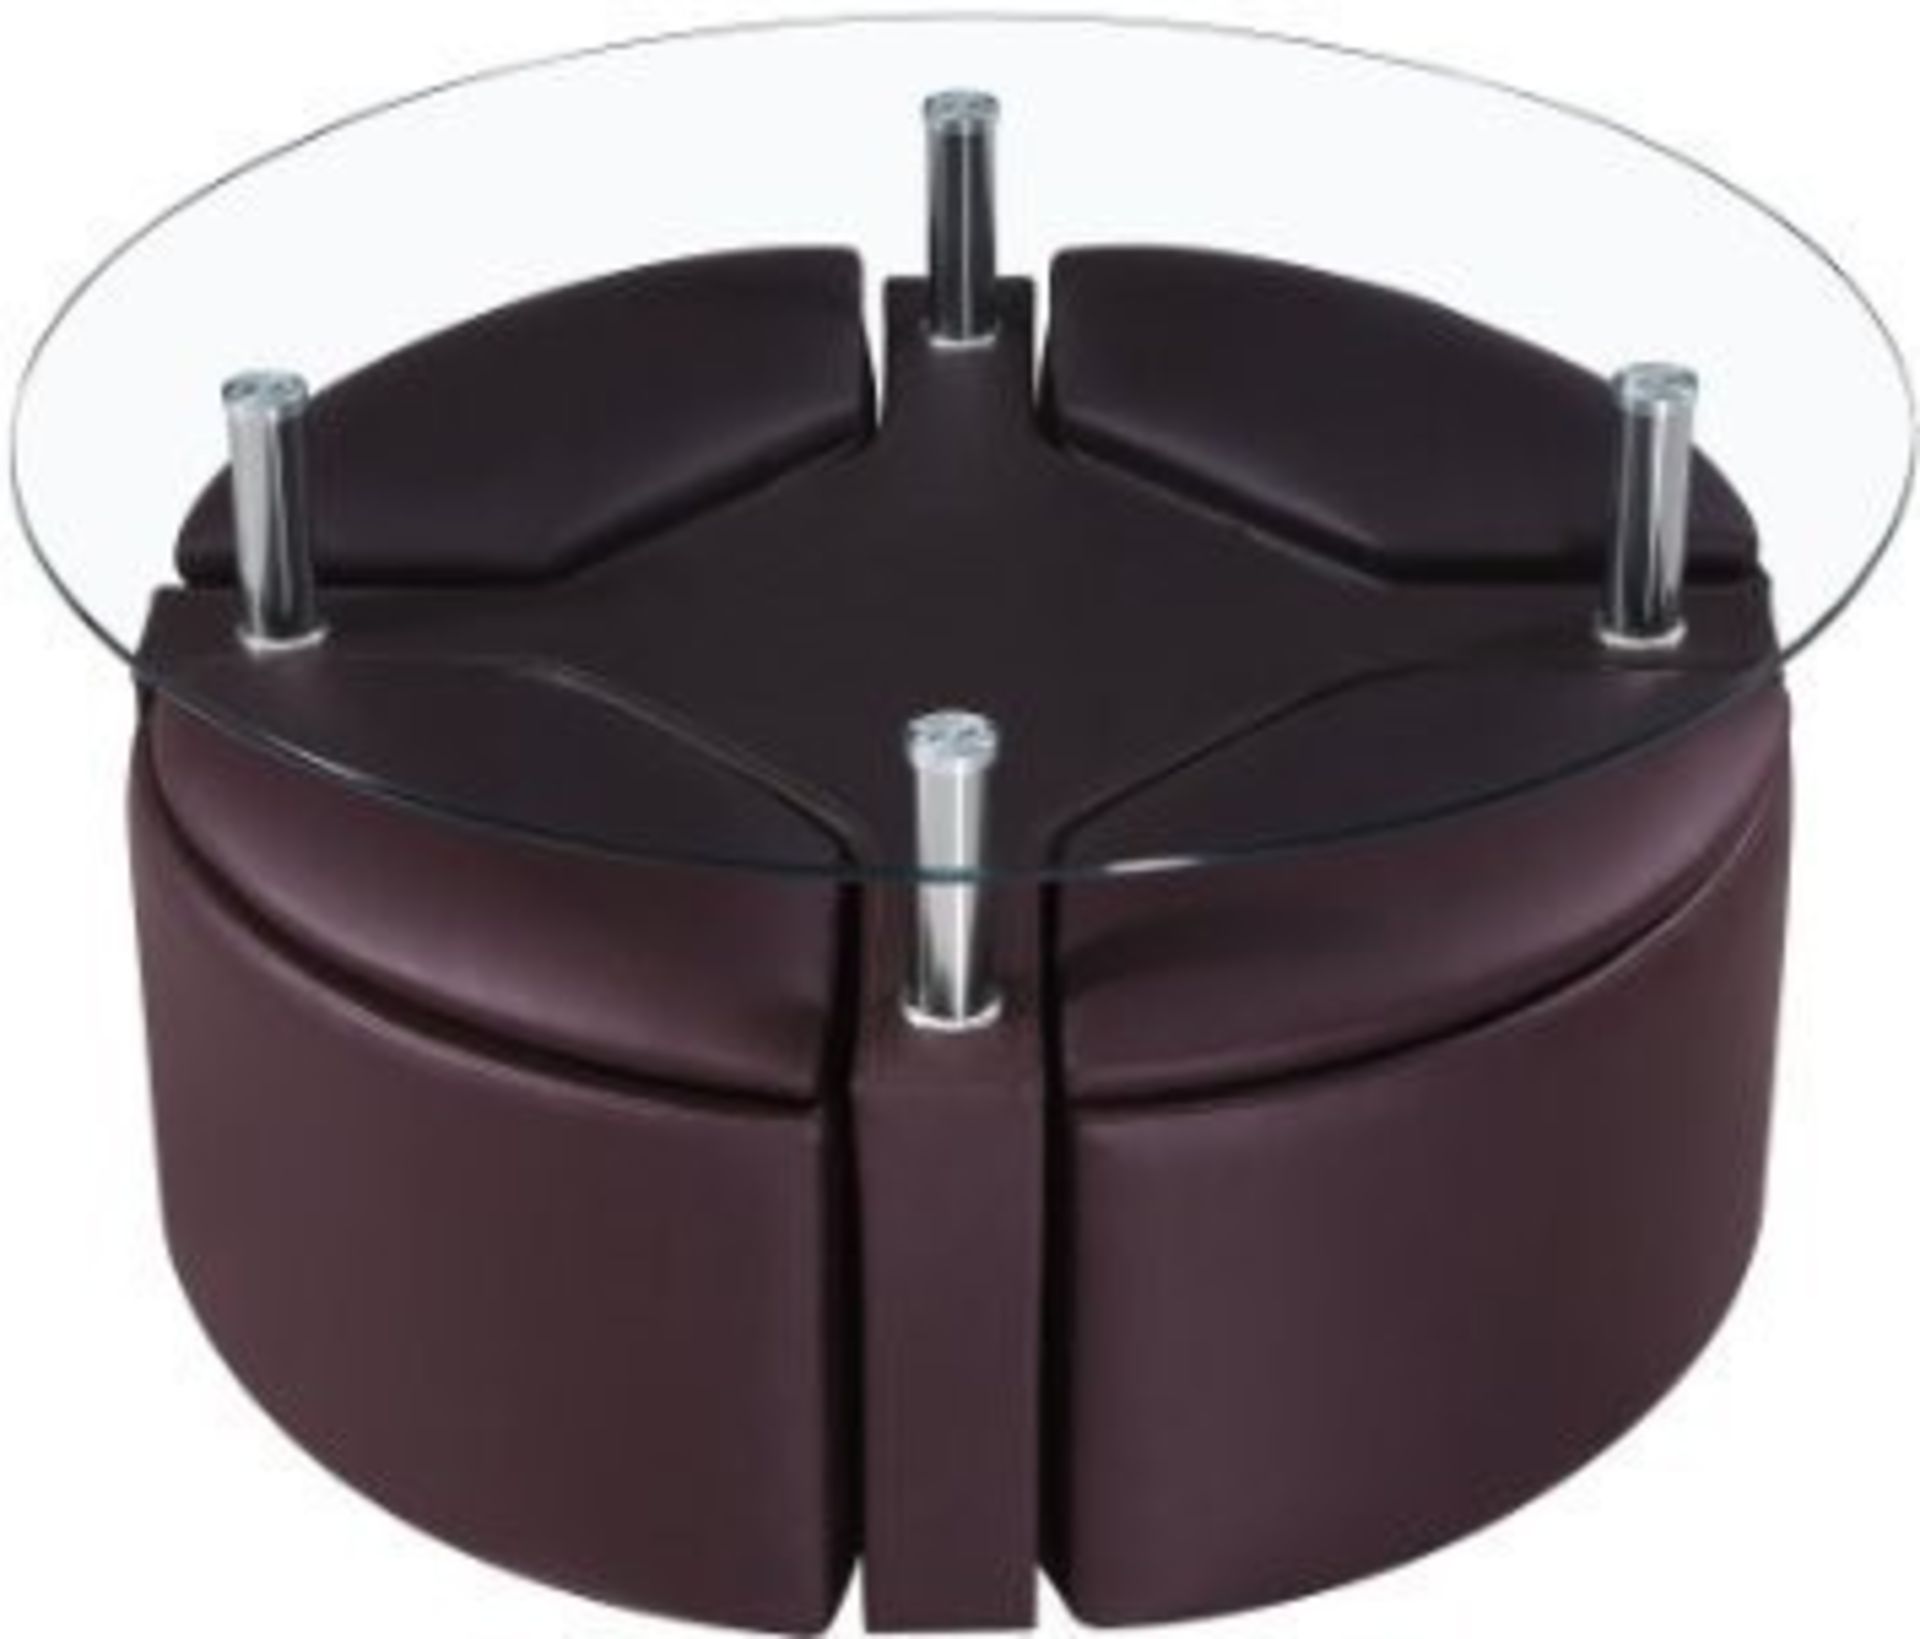 1 x Dakota Round Coffee Table with 4 Ottoman Storage Stools - Colour: BROWN - CL112 - Location: - Image 2 of 2